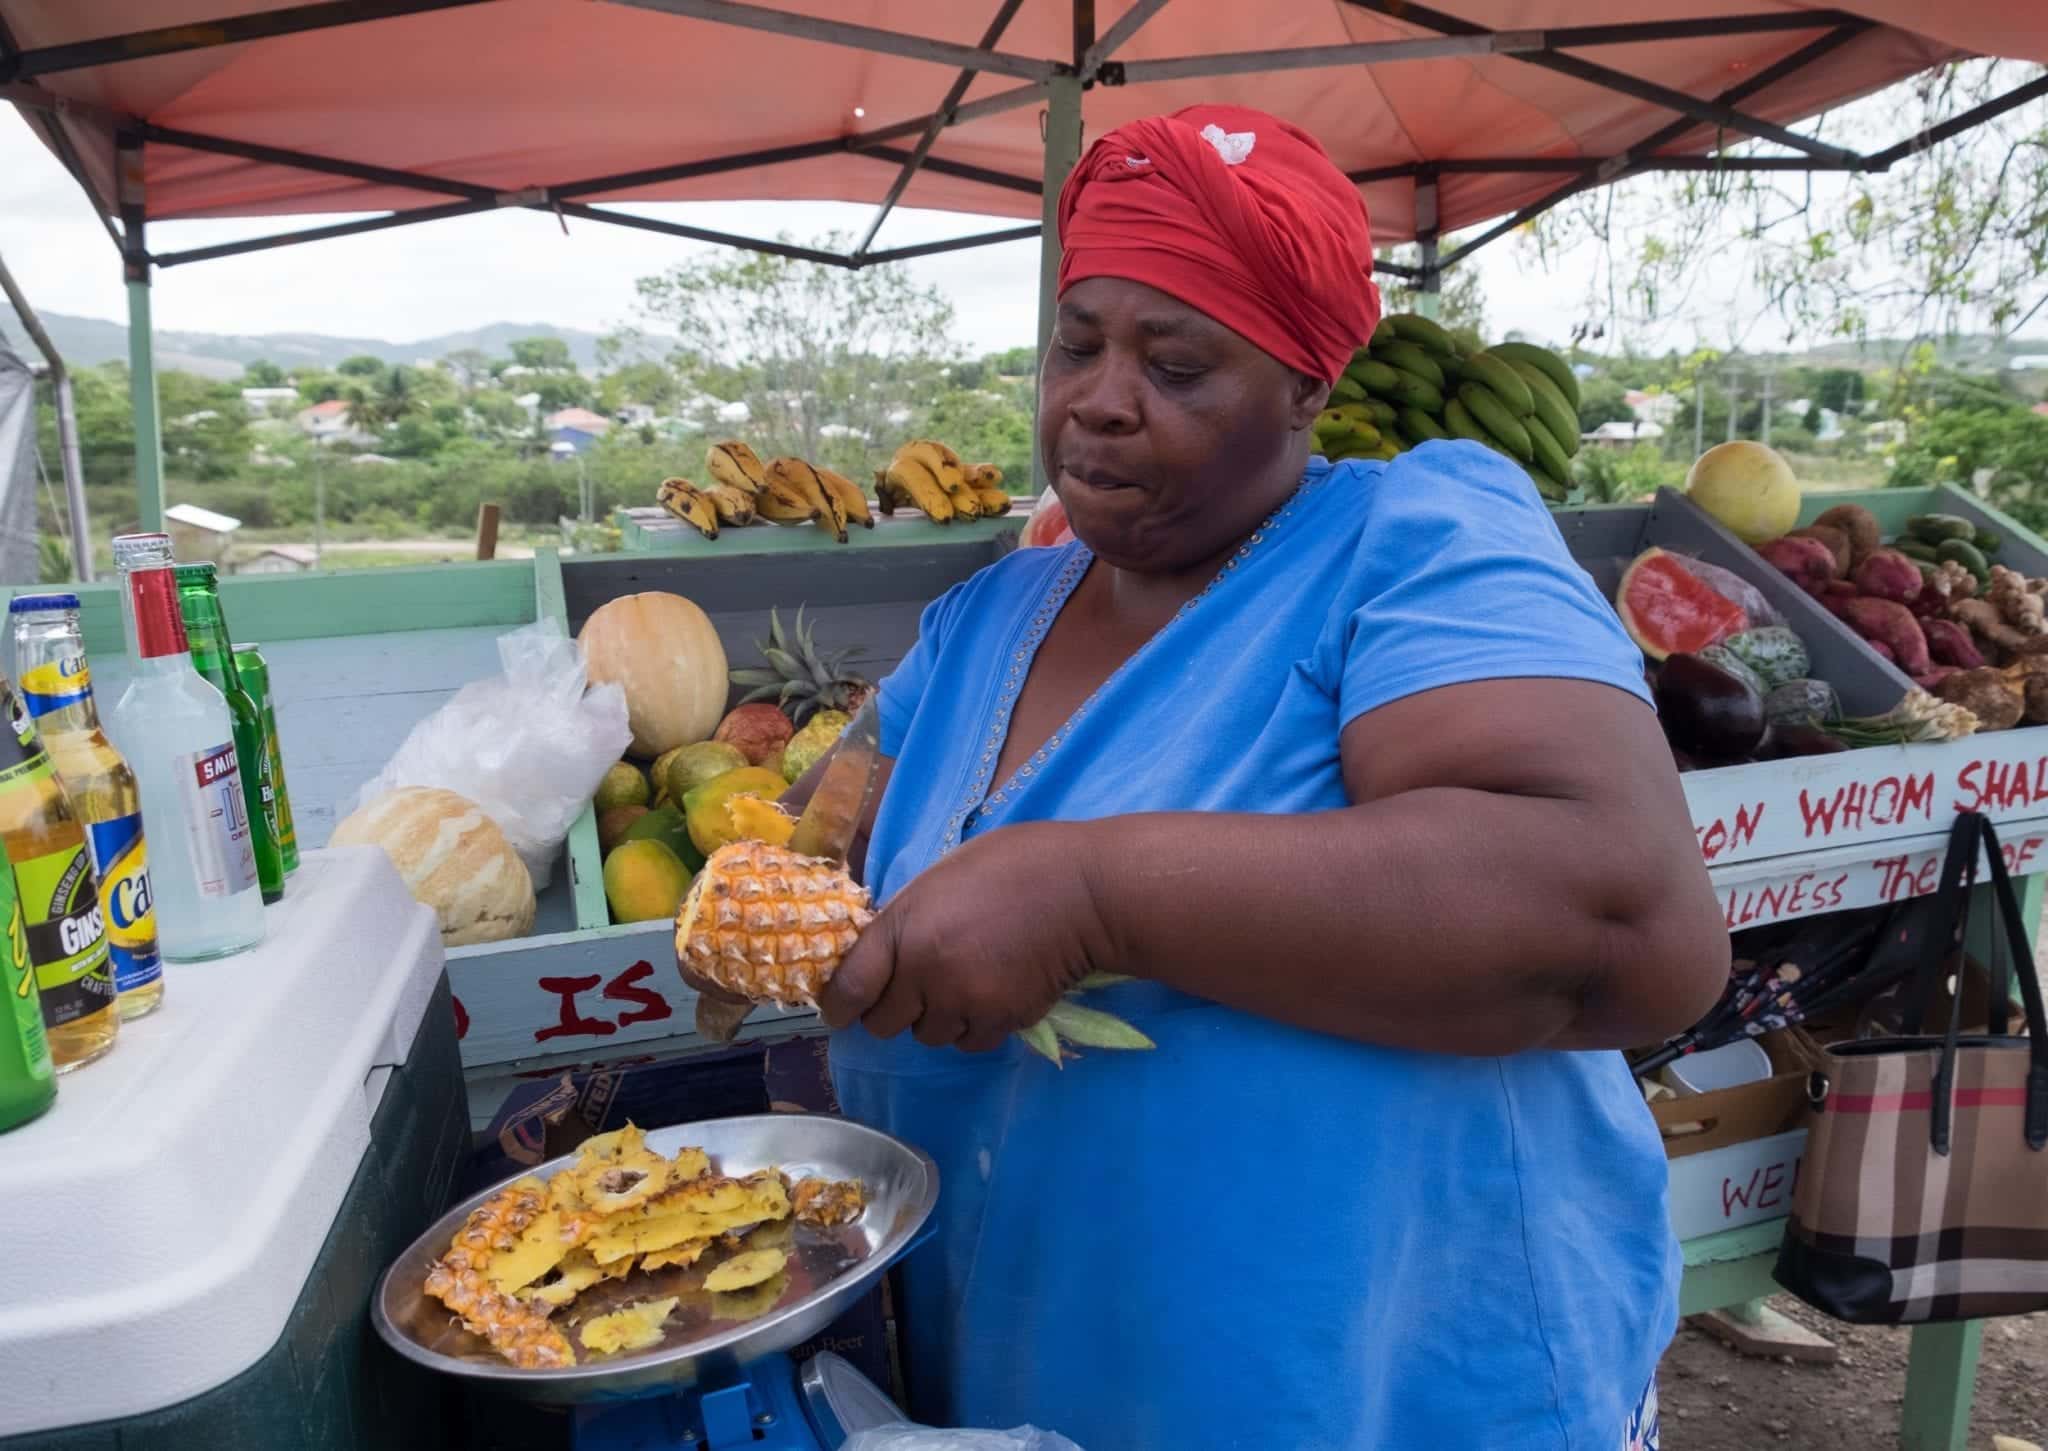 A woman in a red bandana slices a pineapple into a plastic bag in Antigua.